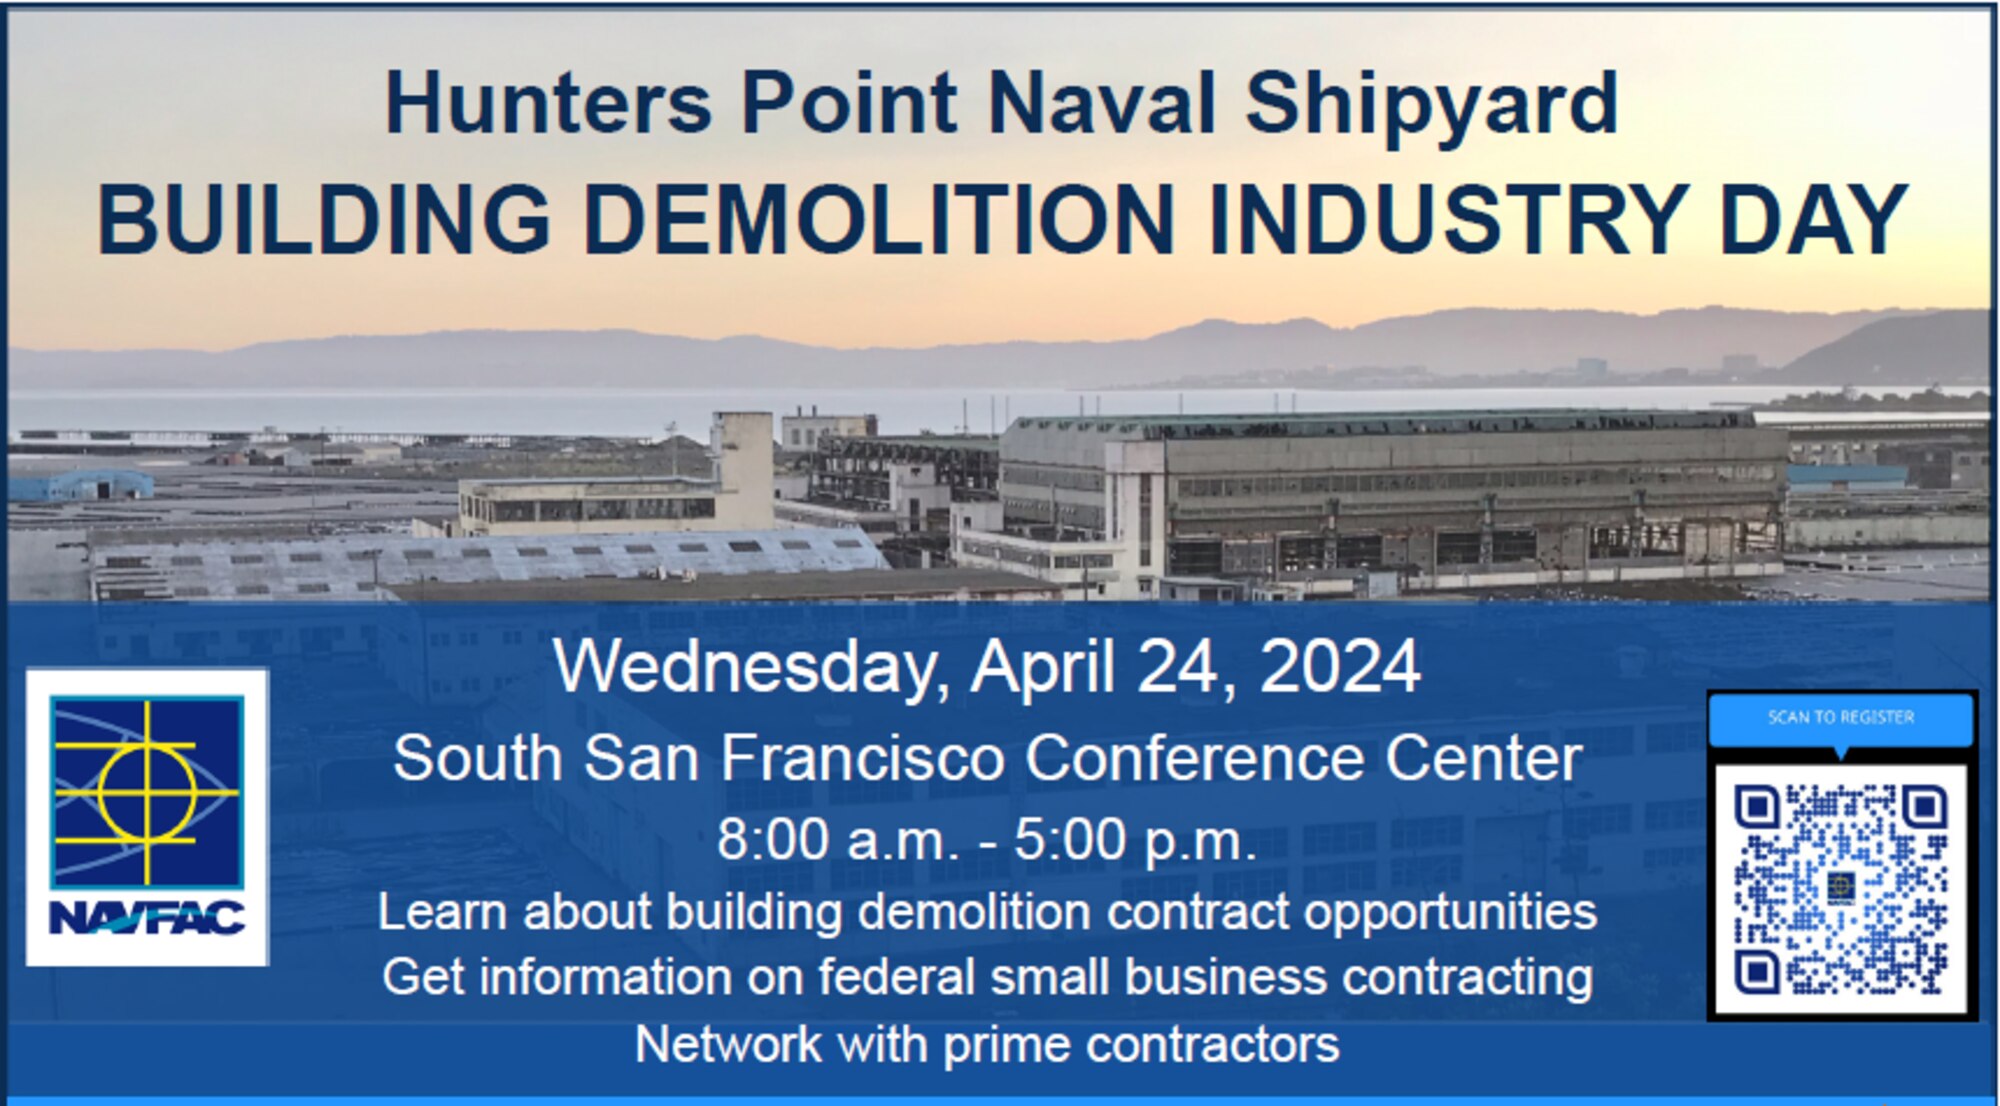 Register now to participate in this event where you can learn more 
about upcoming building demolition contract opportunities, obtain information on federal small business contracting, and network with prime contractors.